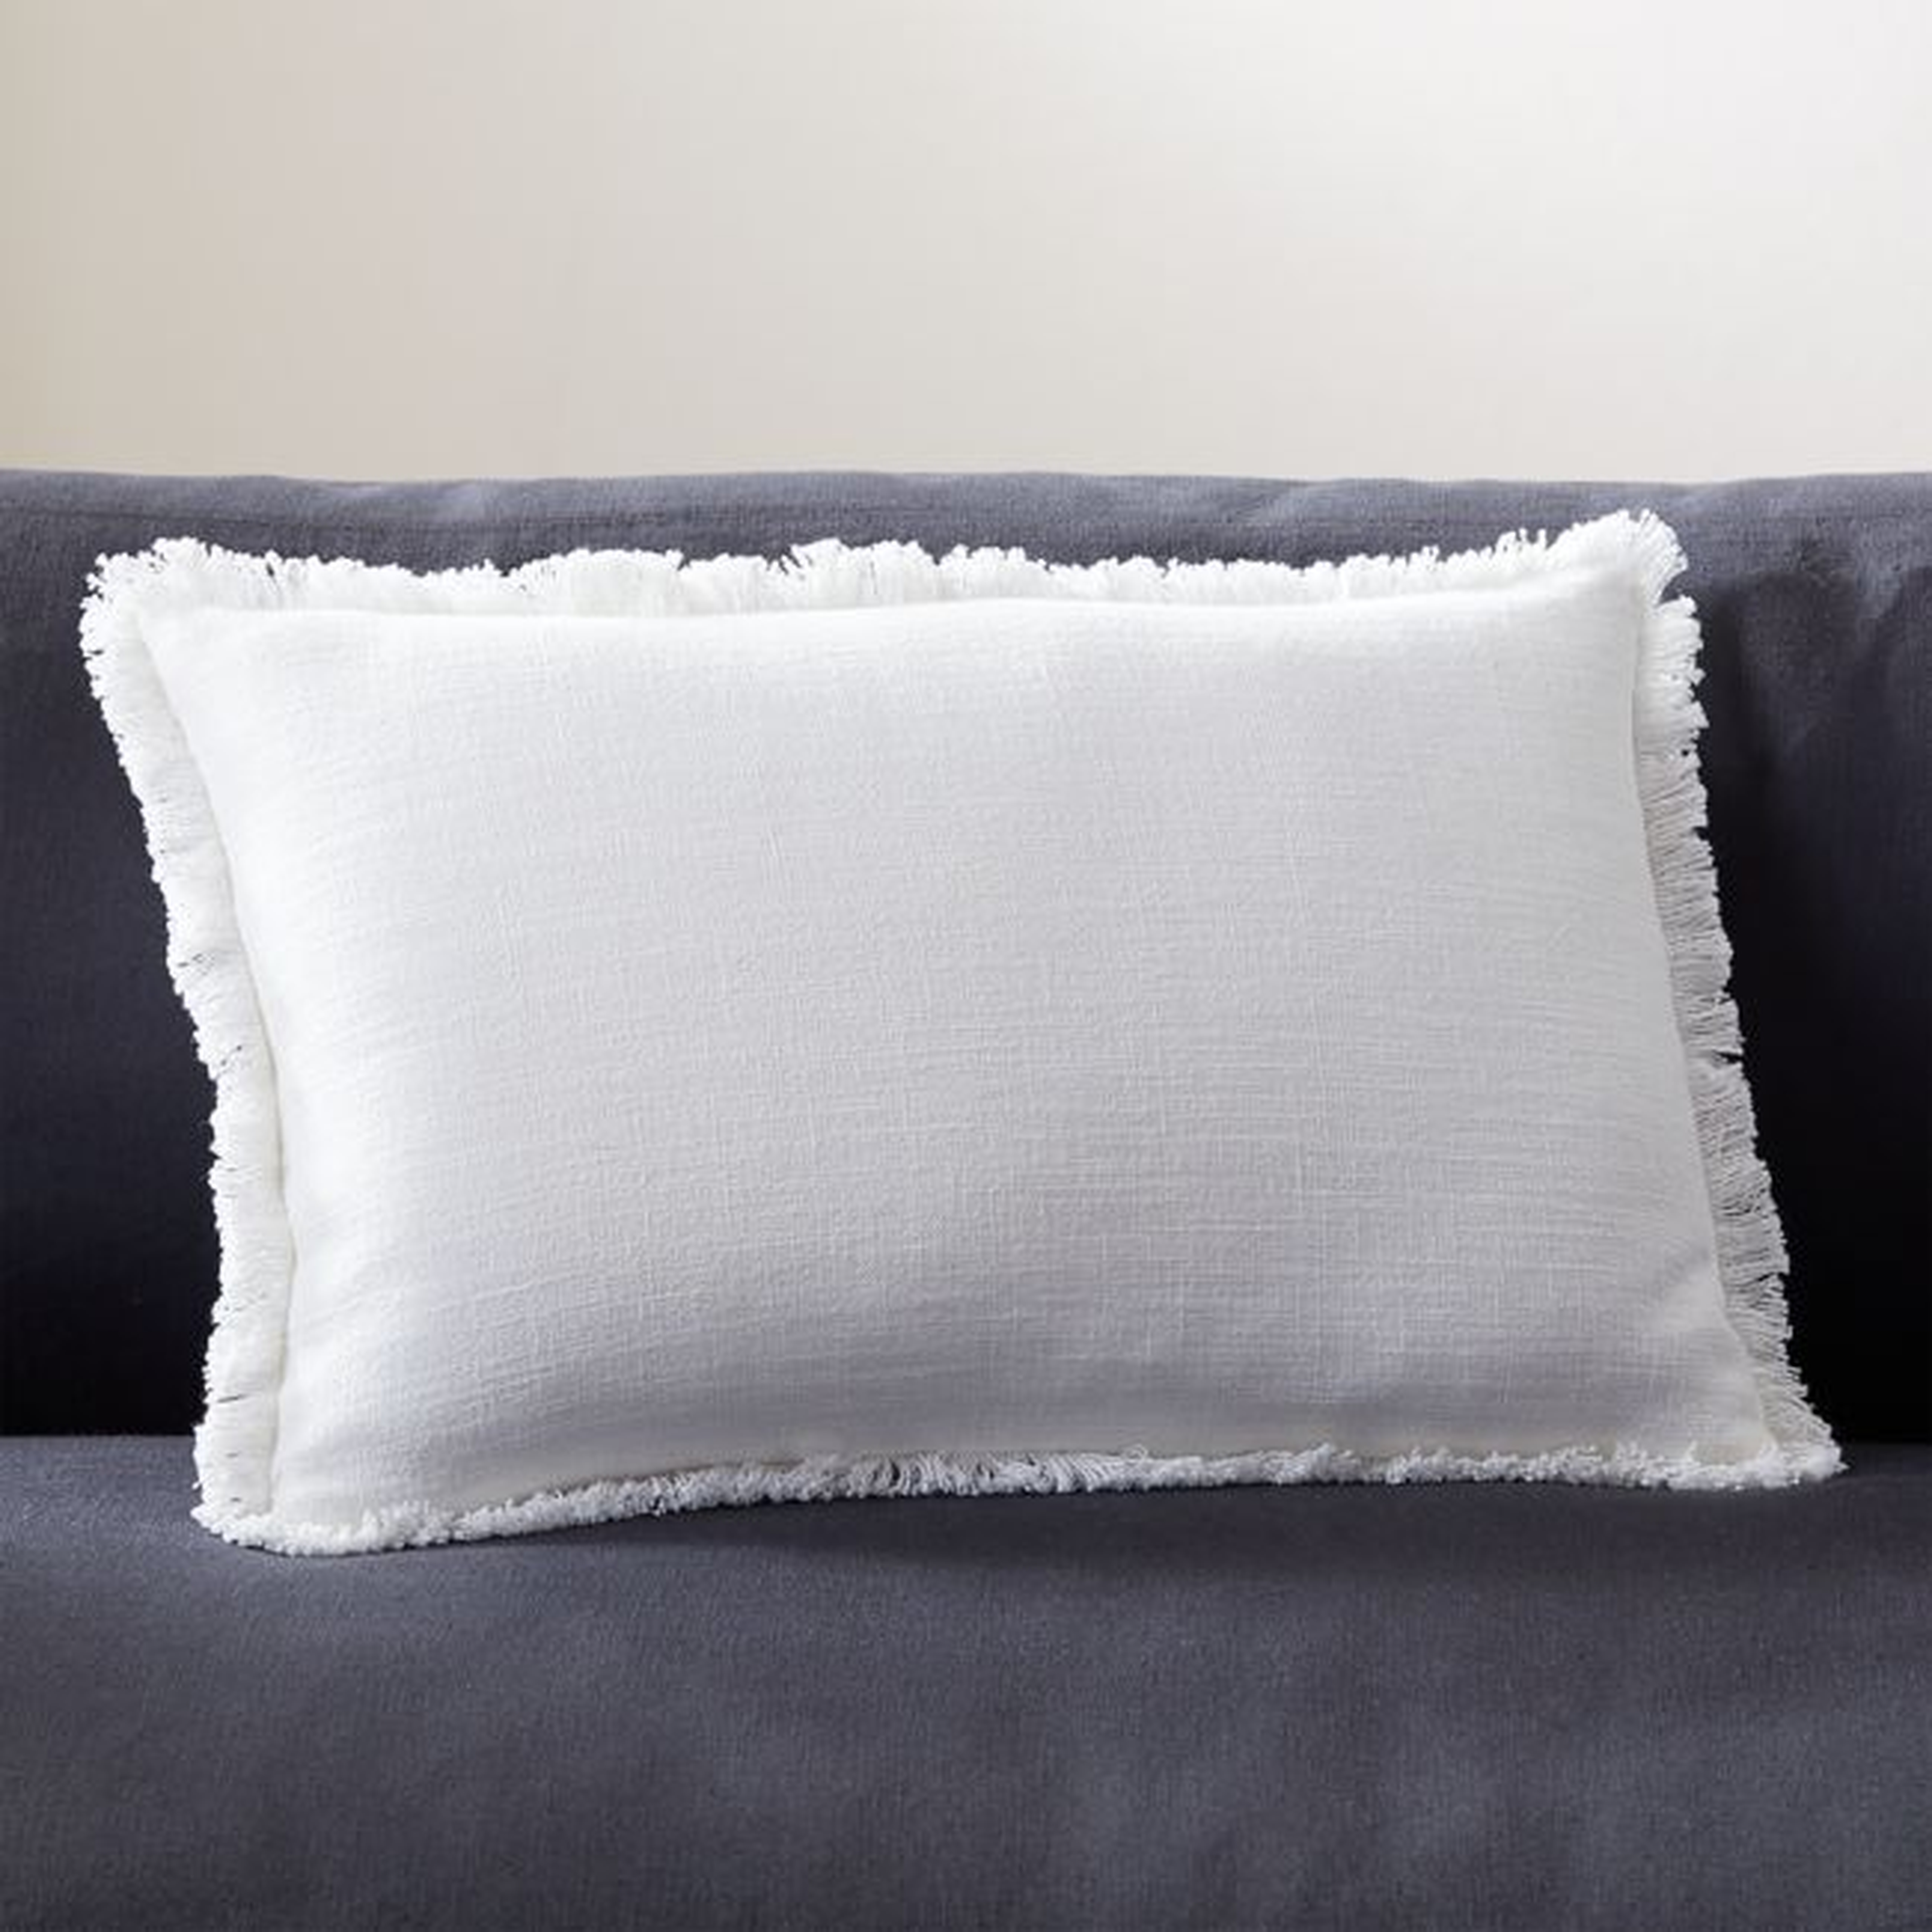 18"x12" Eyelash Ivory Pillow with Feather-Down Insert - CB2